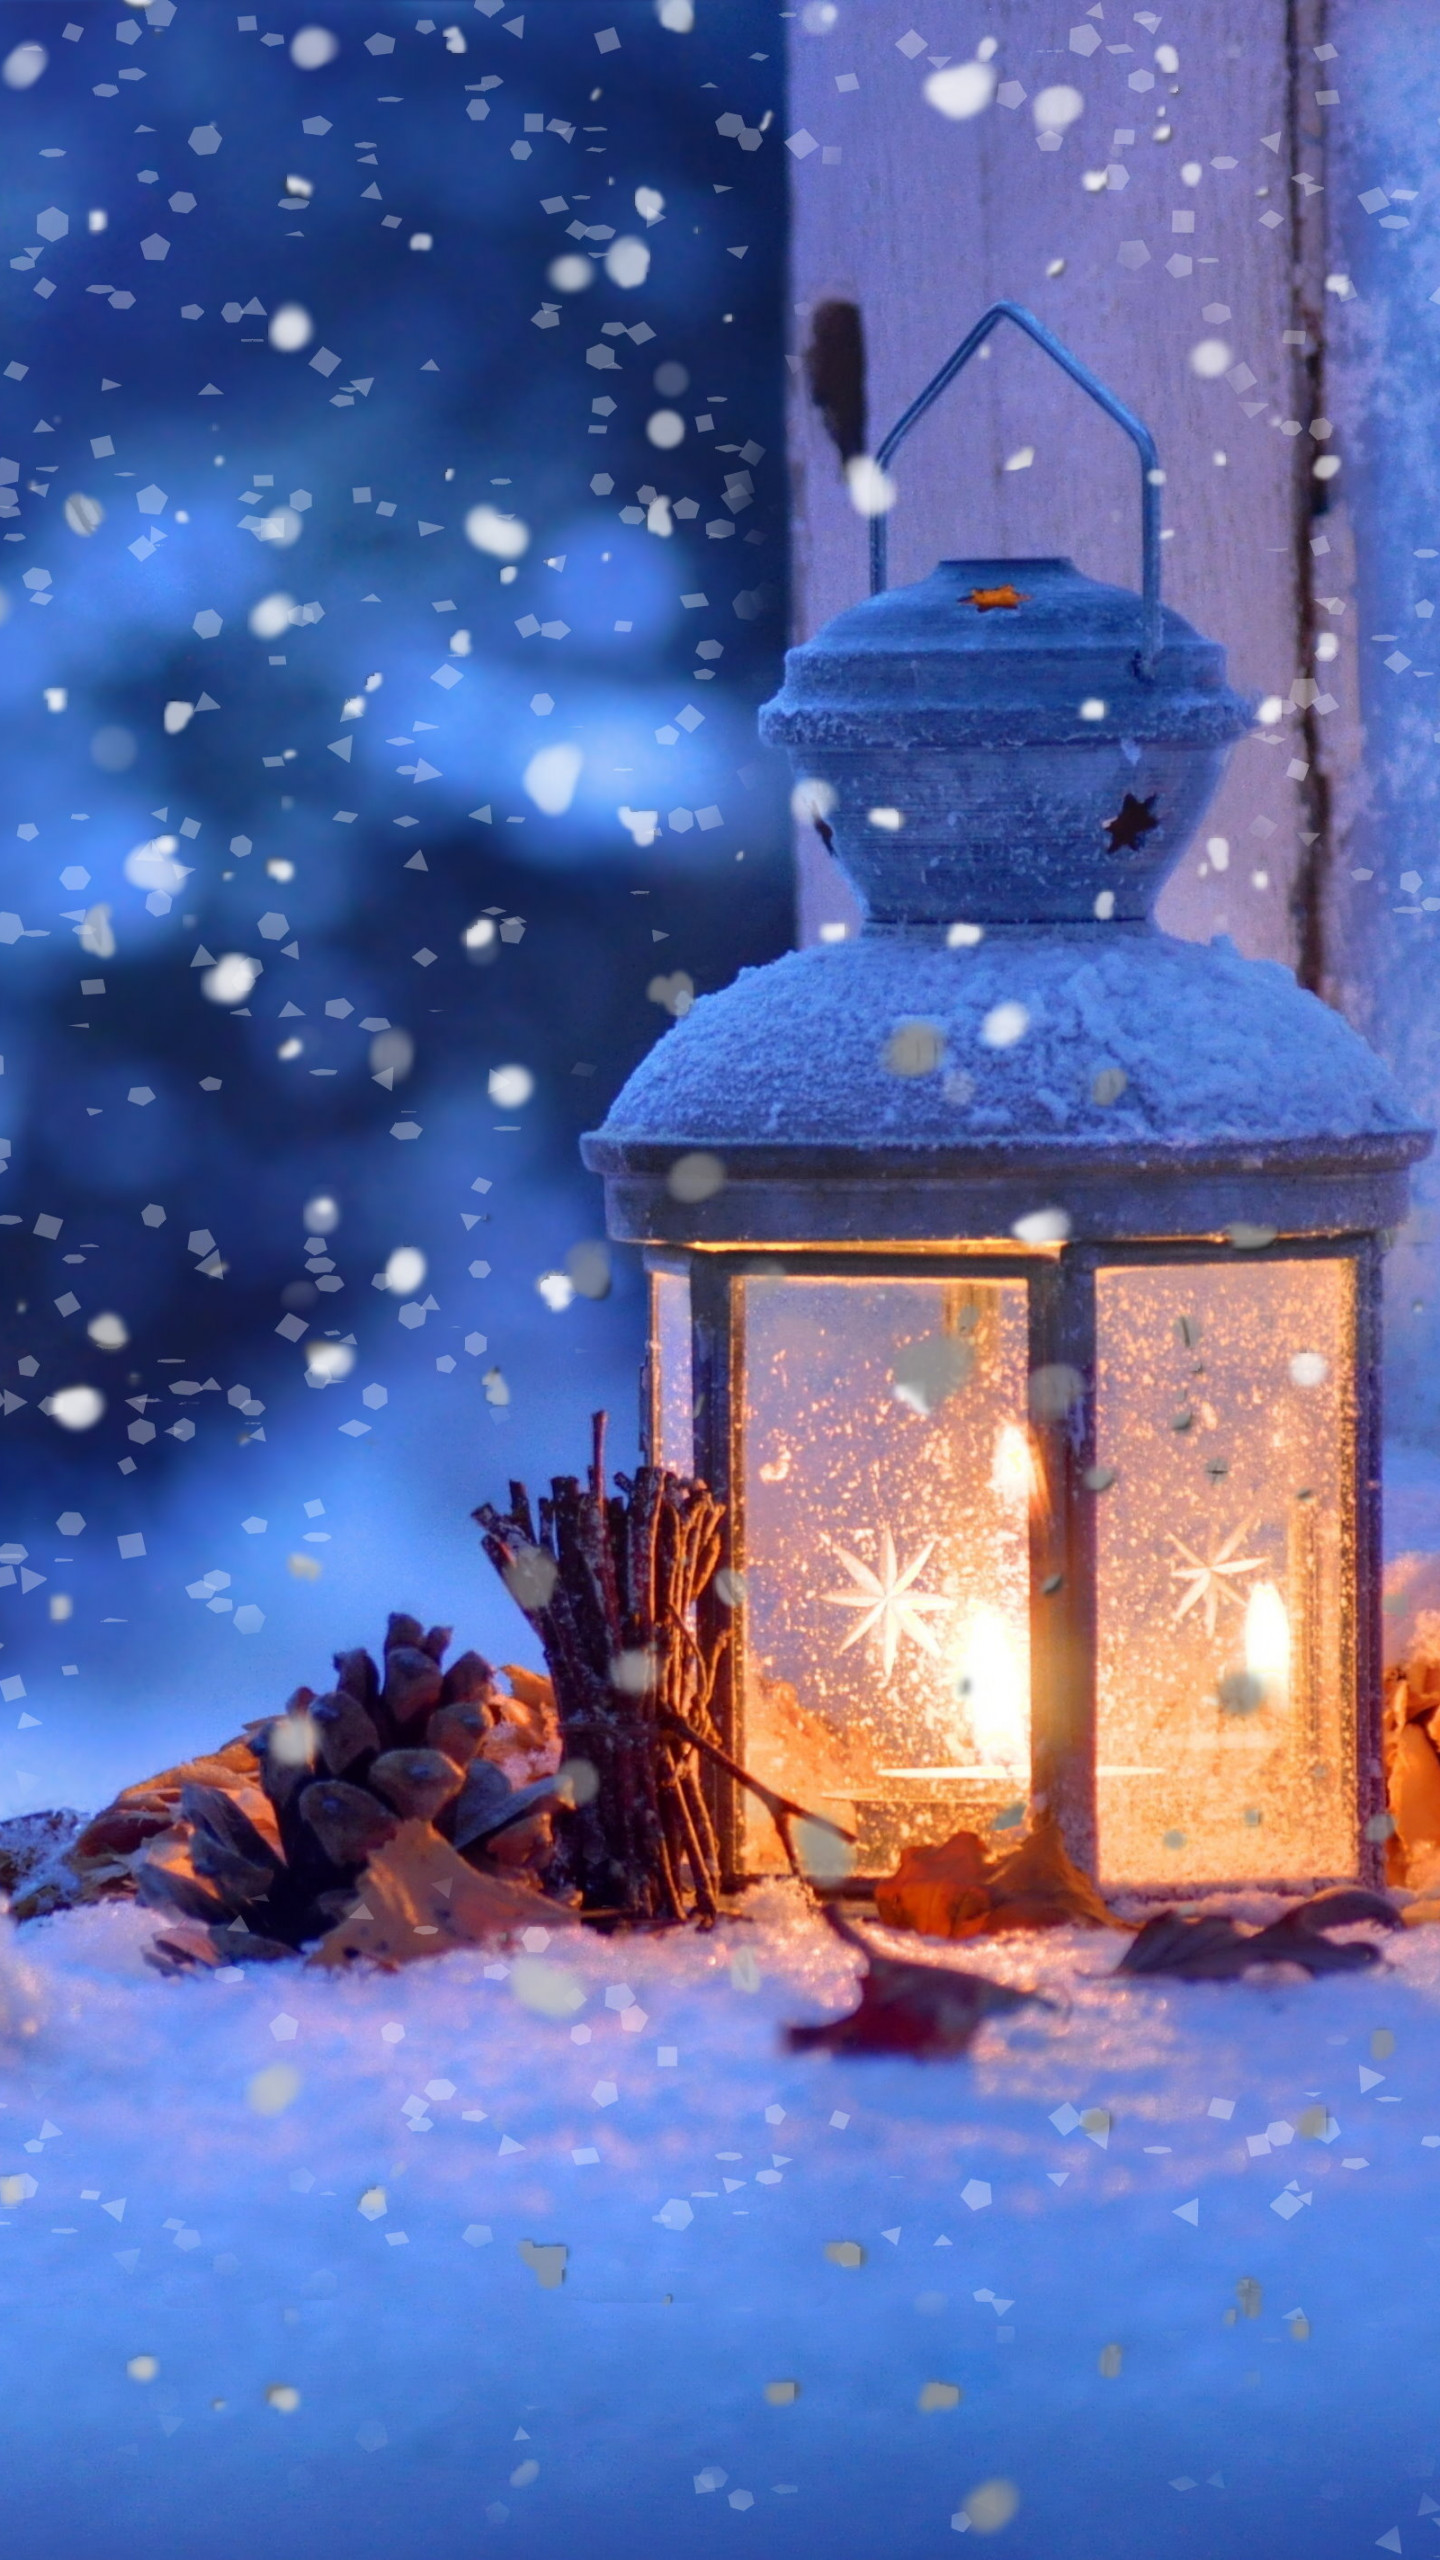 Stock Images snow, lamp, winter, 4k, Stock Images 16775